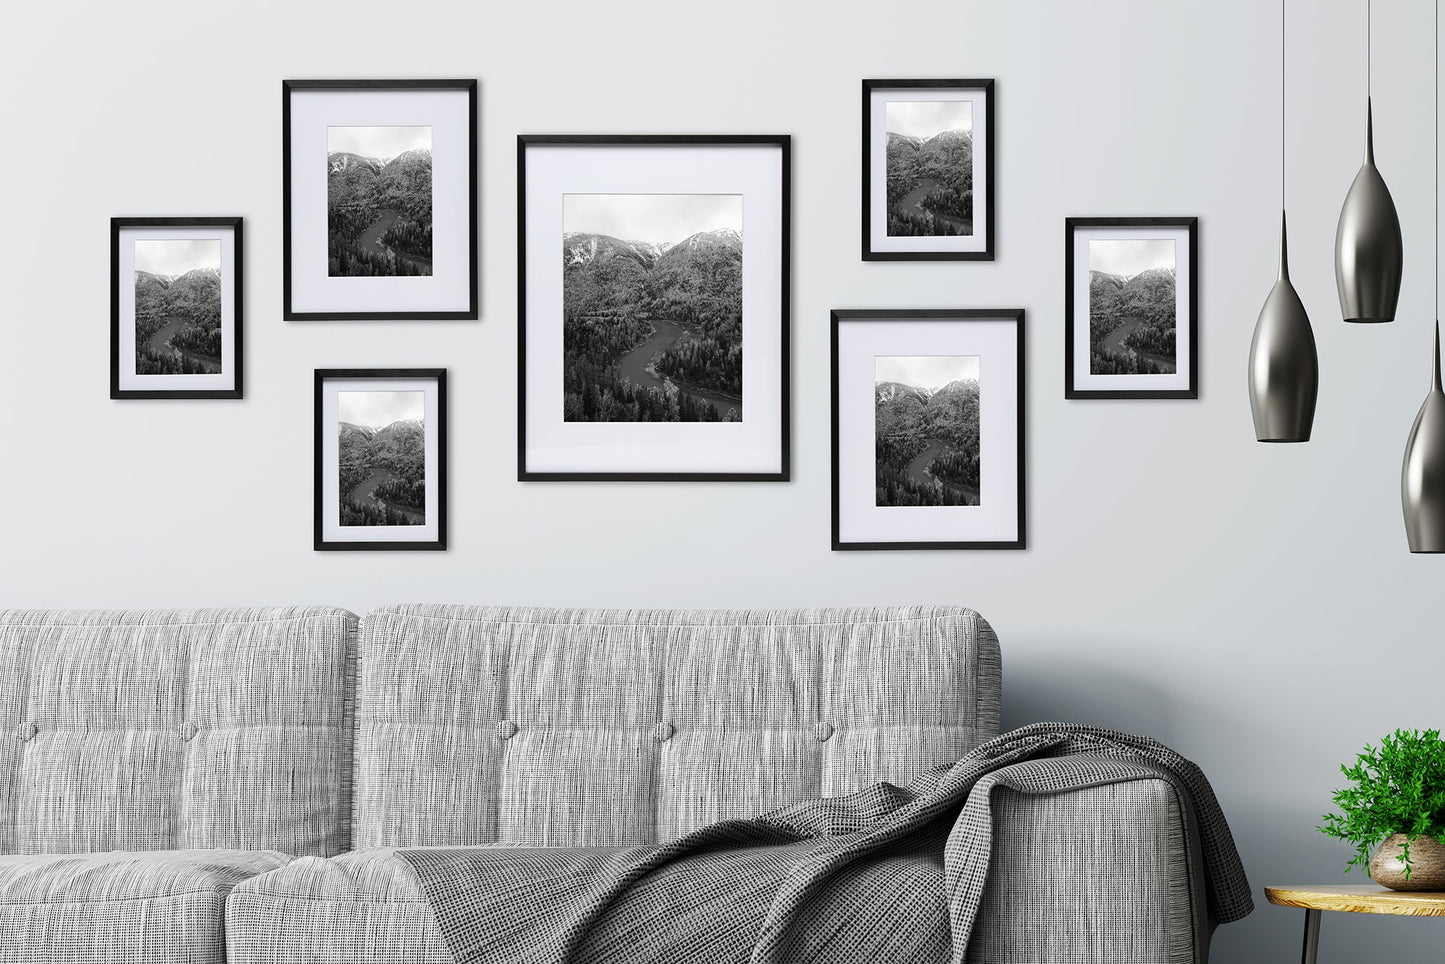 7 Piece Deluxe Black Aluminum Contemporary Picture Frame Set with Tempered Glass